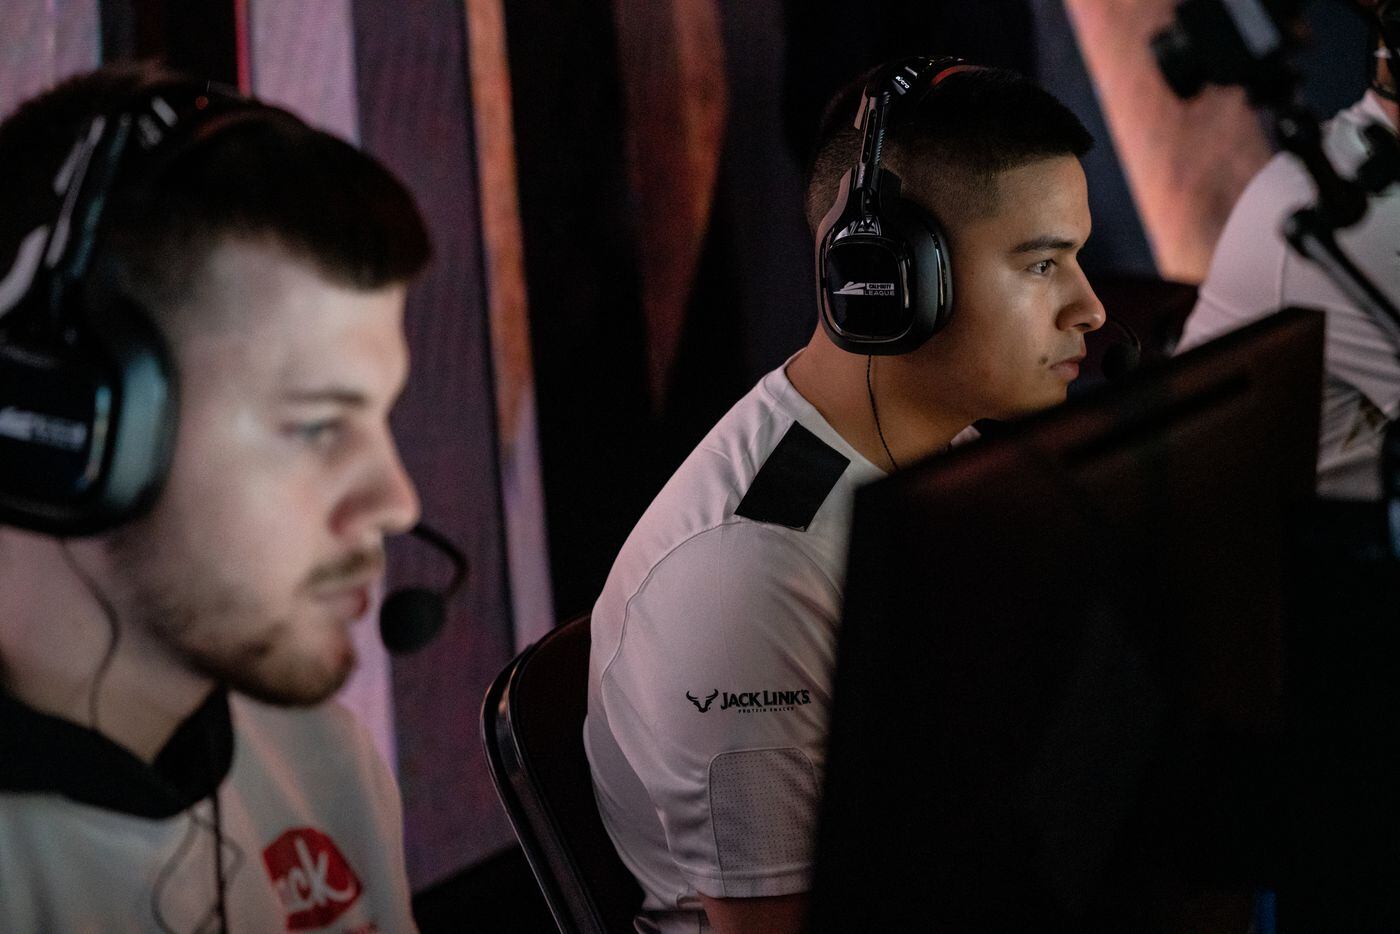 From left, Reece “Vivid” Drost and Anthony “Shotzzy” Cuevas-Castro prepare for the Dallas Empire's elimination match against the Toronto Ultra at the Call of Duty league playoffs at the Galen Center on Saturday, August 21, 2021 in Los Angeles, California. (Justin L. Stewart/Special Contributor)